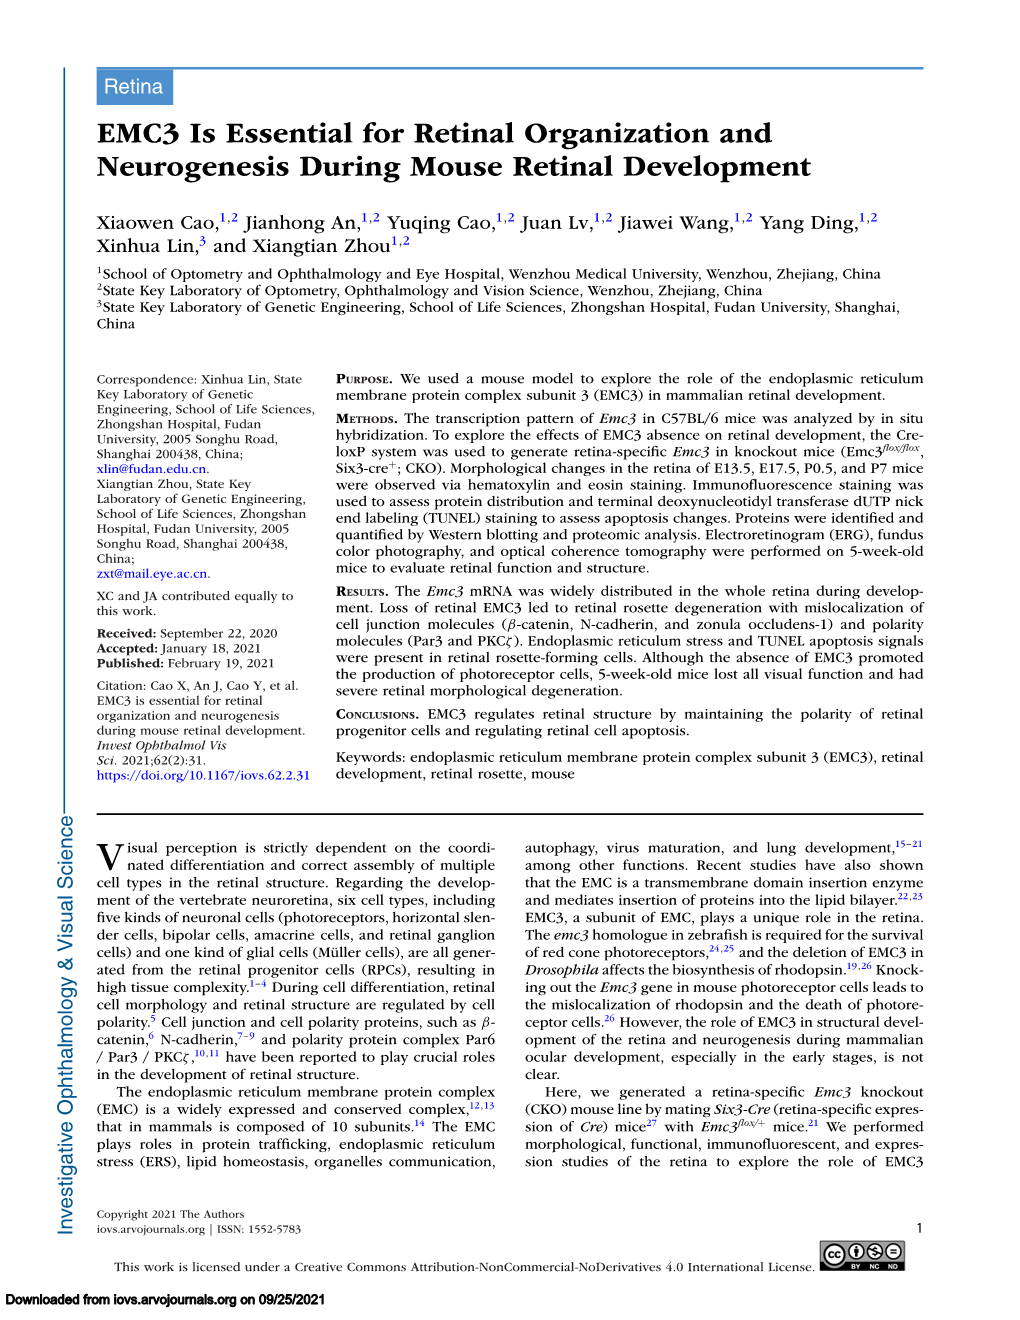 EMC3 Is Essential for Retinal Organization and Neurogenesis During Mouse Retinal Development